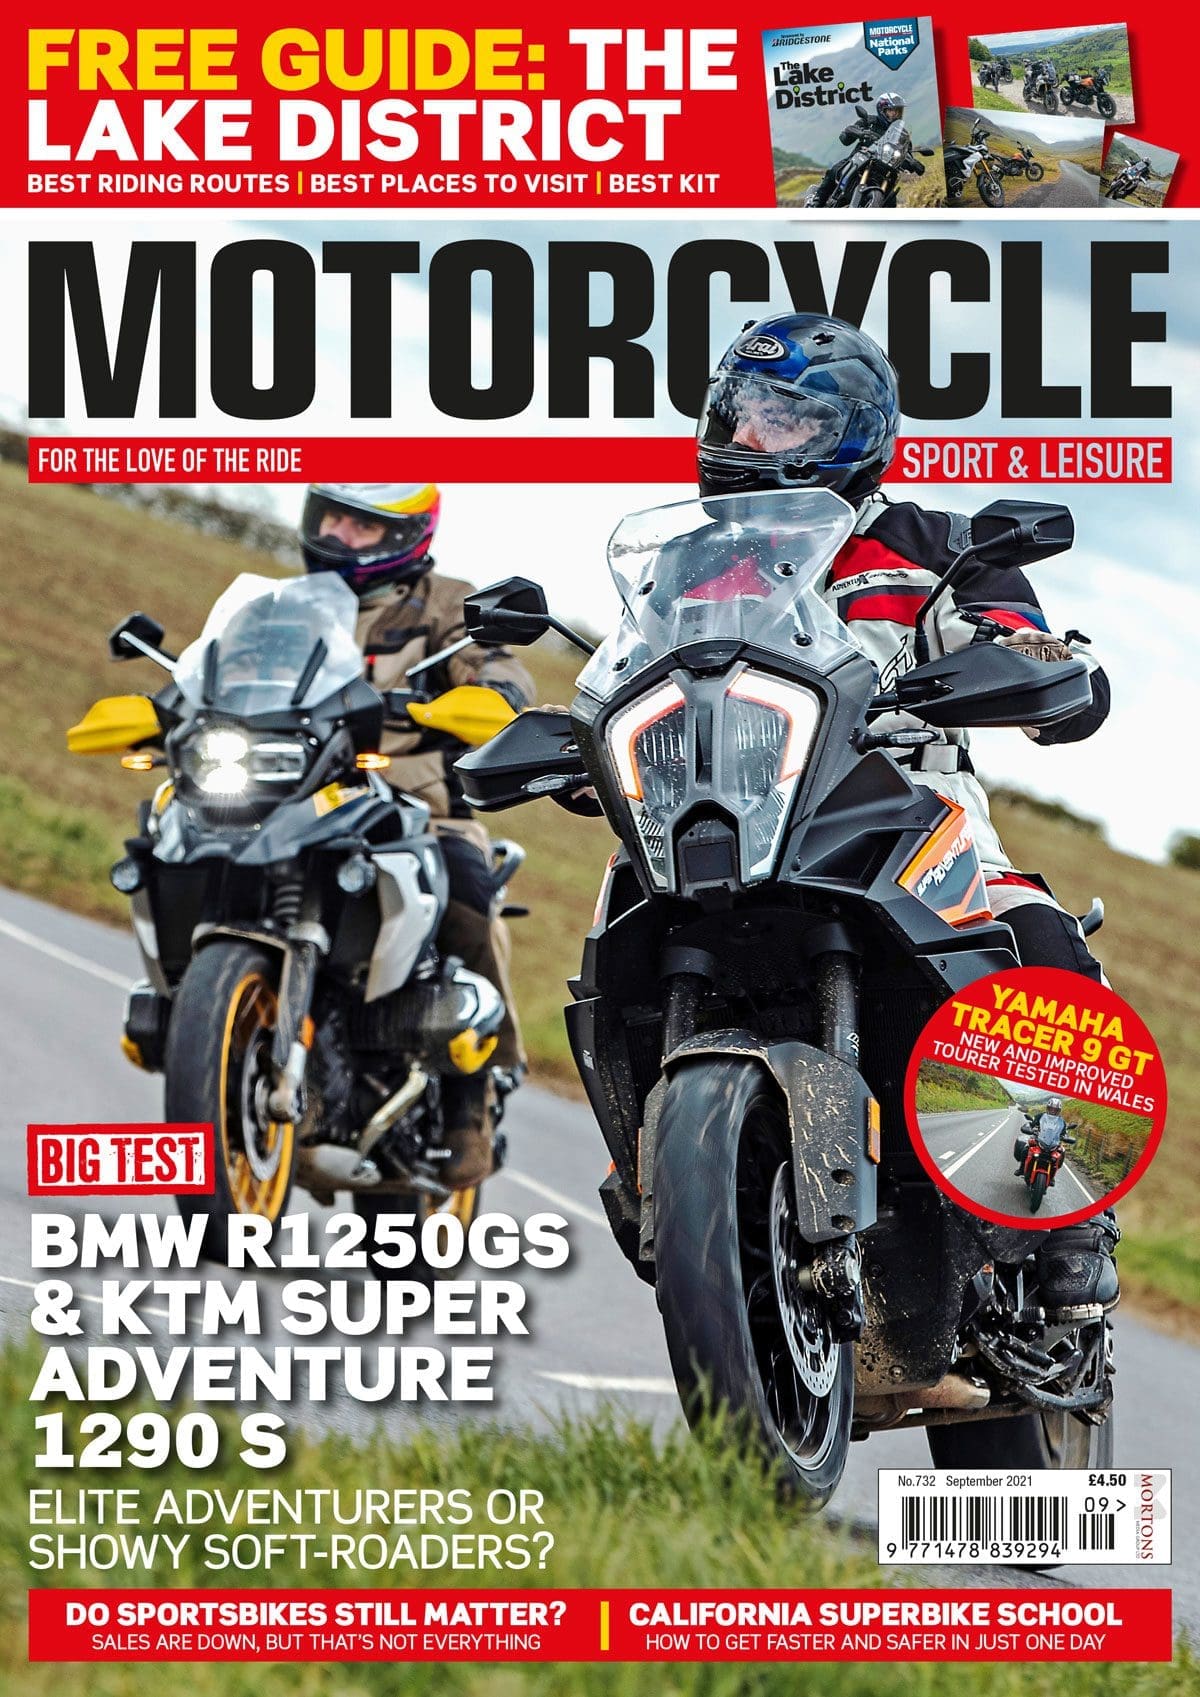 PREVIEW: September issue of Motorcycle Sport & Leisure magazine